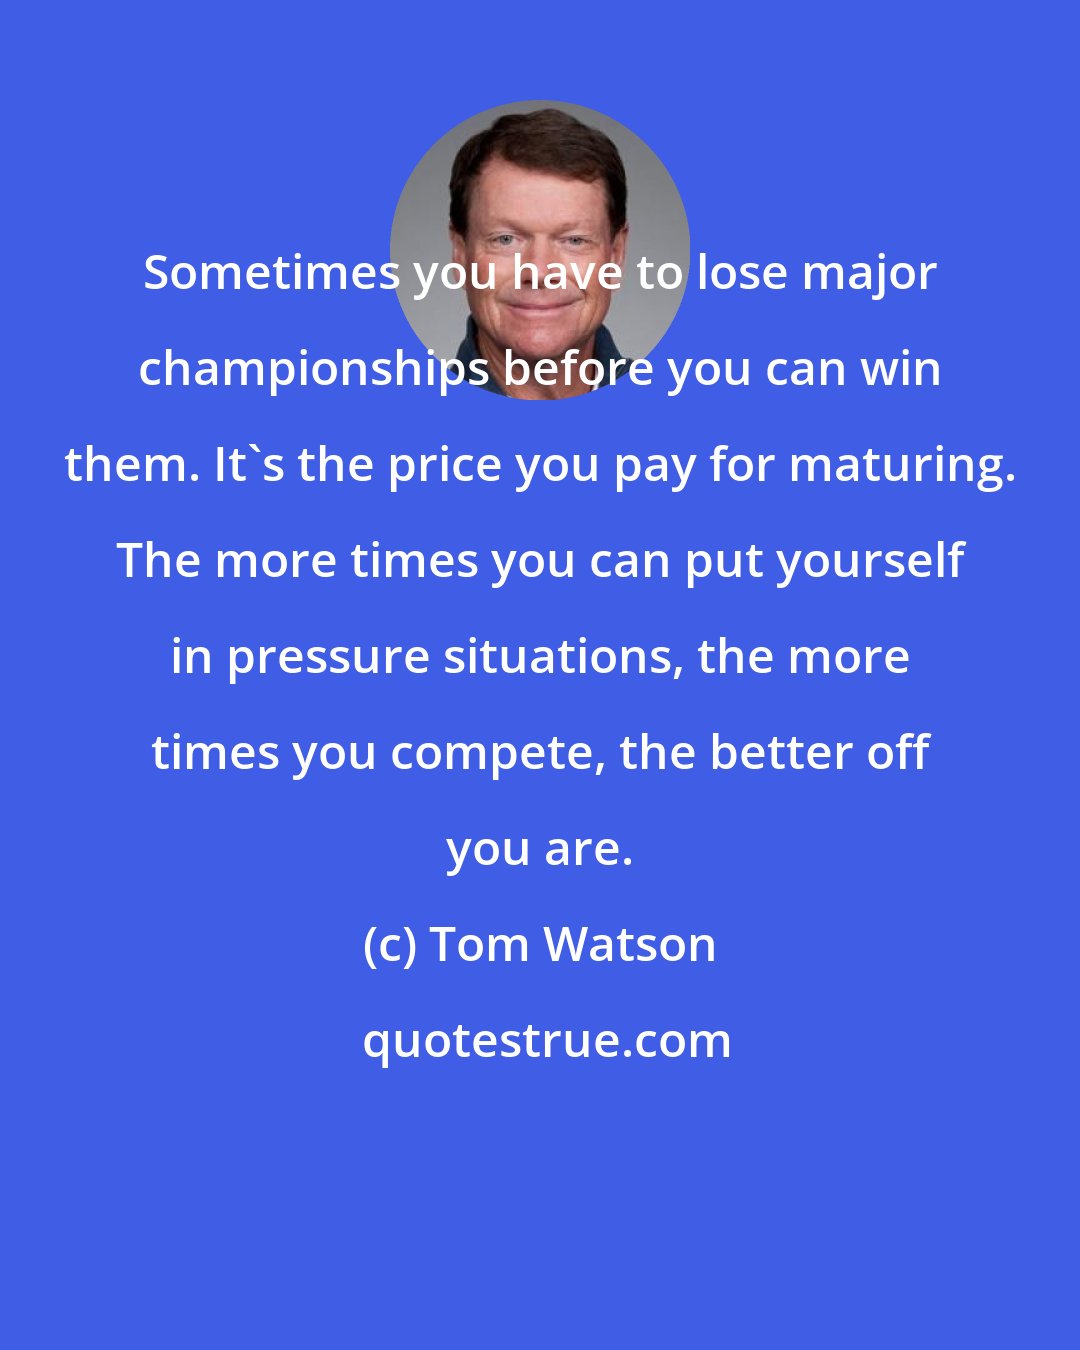 Tom Watson: Sometimes you have to lose major championships before you can win them. It's the price you pay for maturing. The more times you can put yourself in pressure situations, the more times you compete, the better off you are.